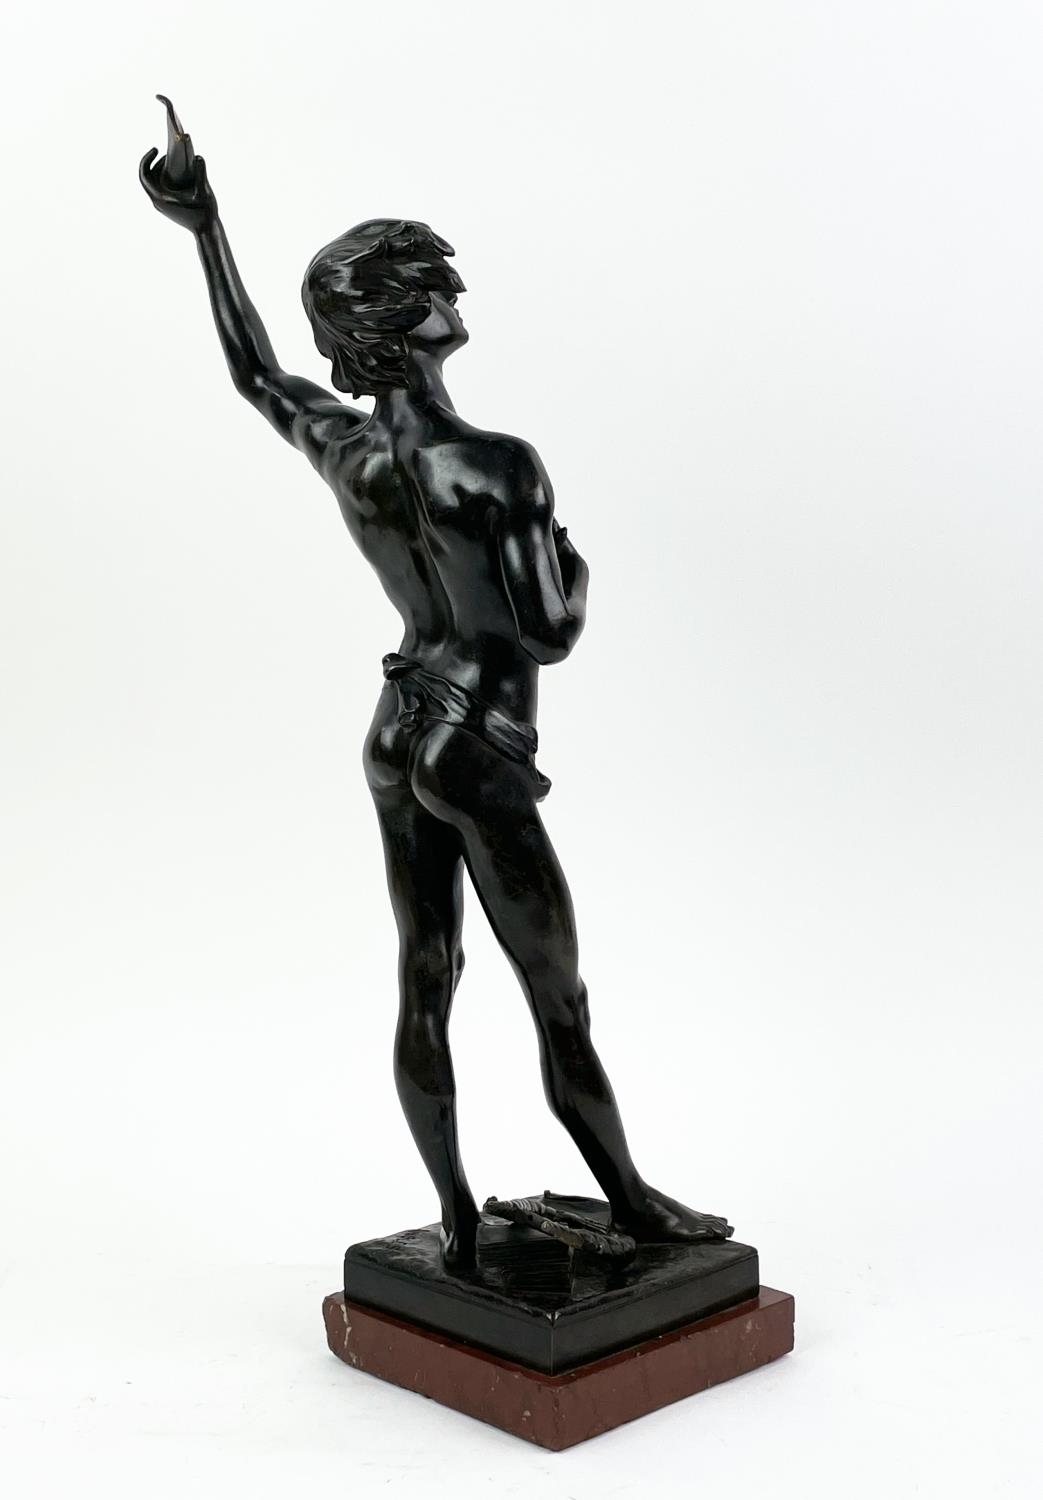 BRONZE FIGURE, ANGLES CANE (1859-1911), 'Premier triumphe', mounted on a rouge marble plinth base, - Image 3 of 8